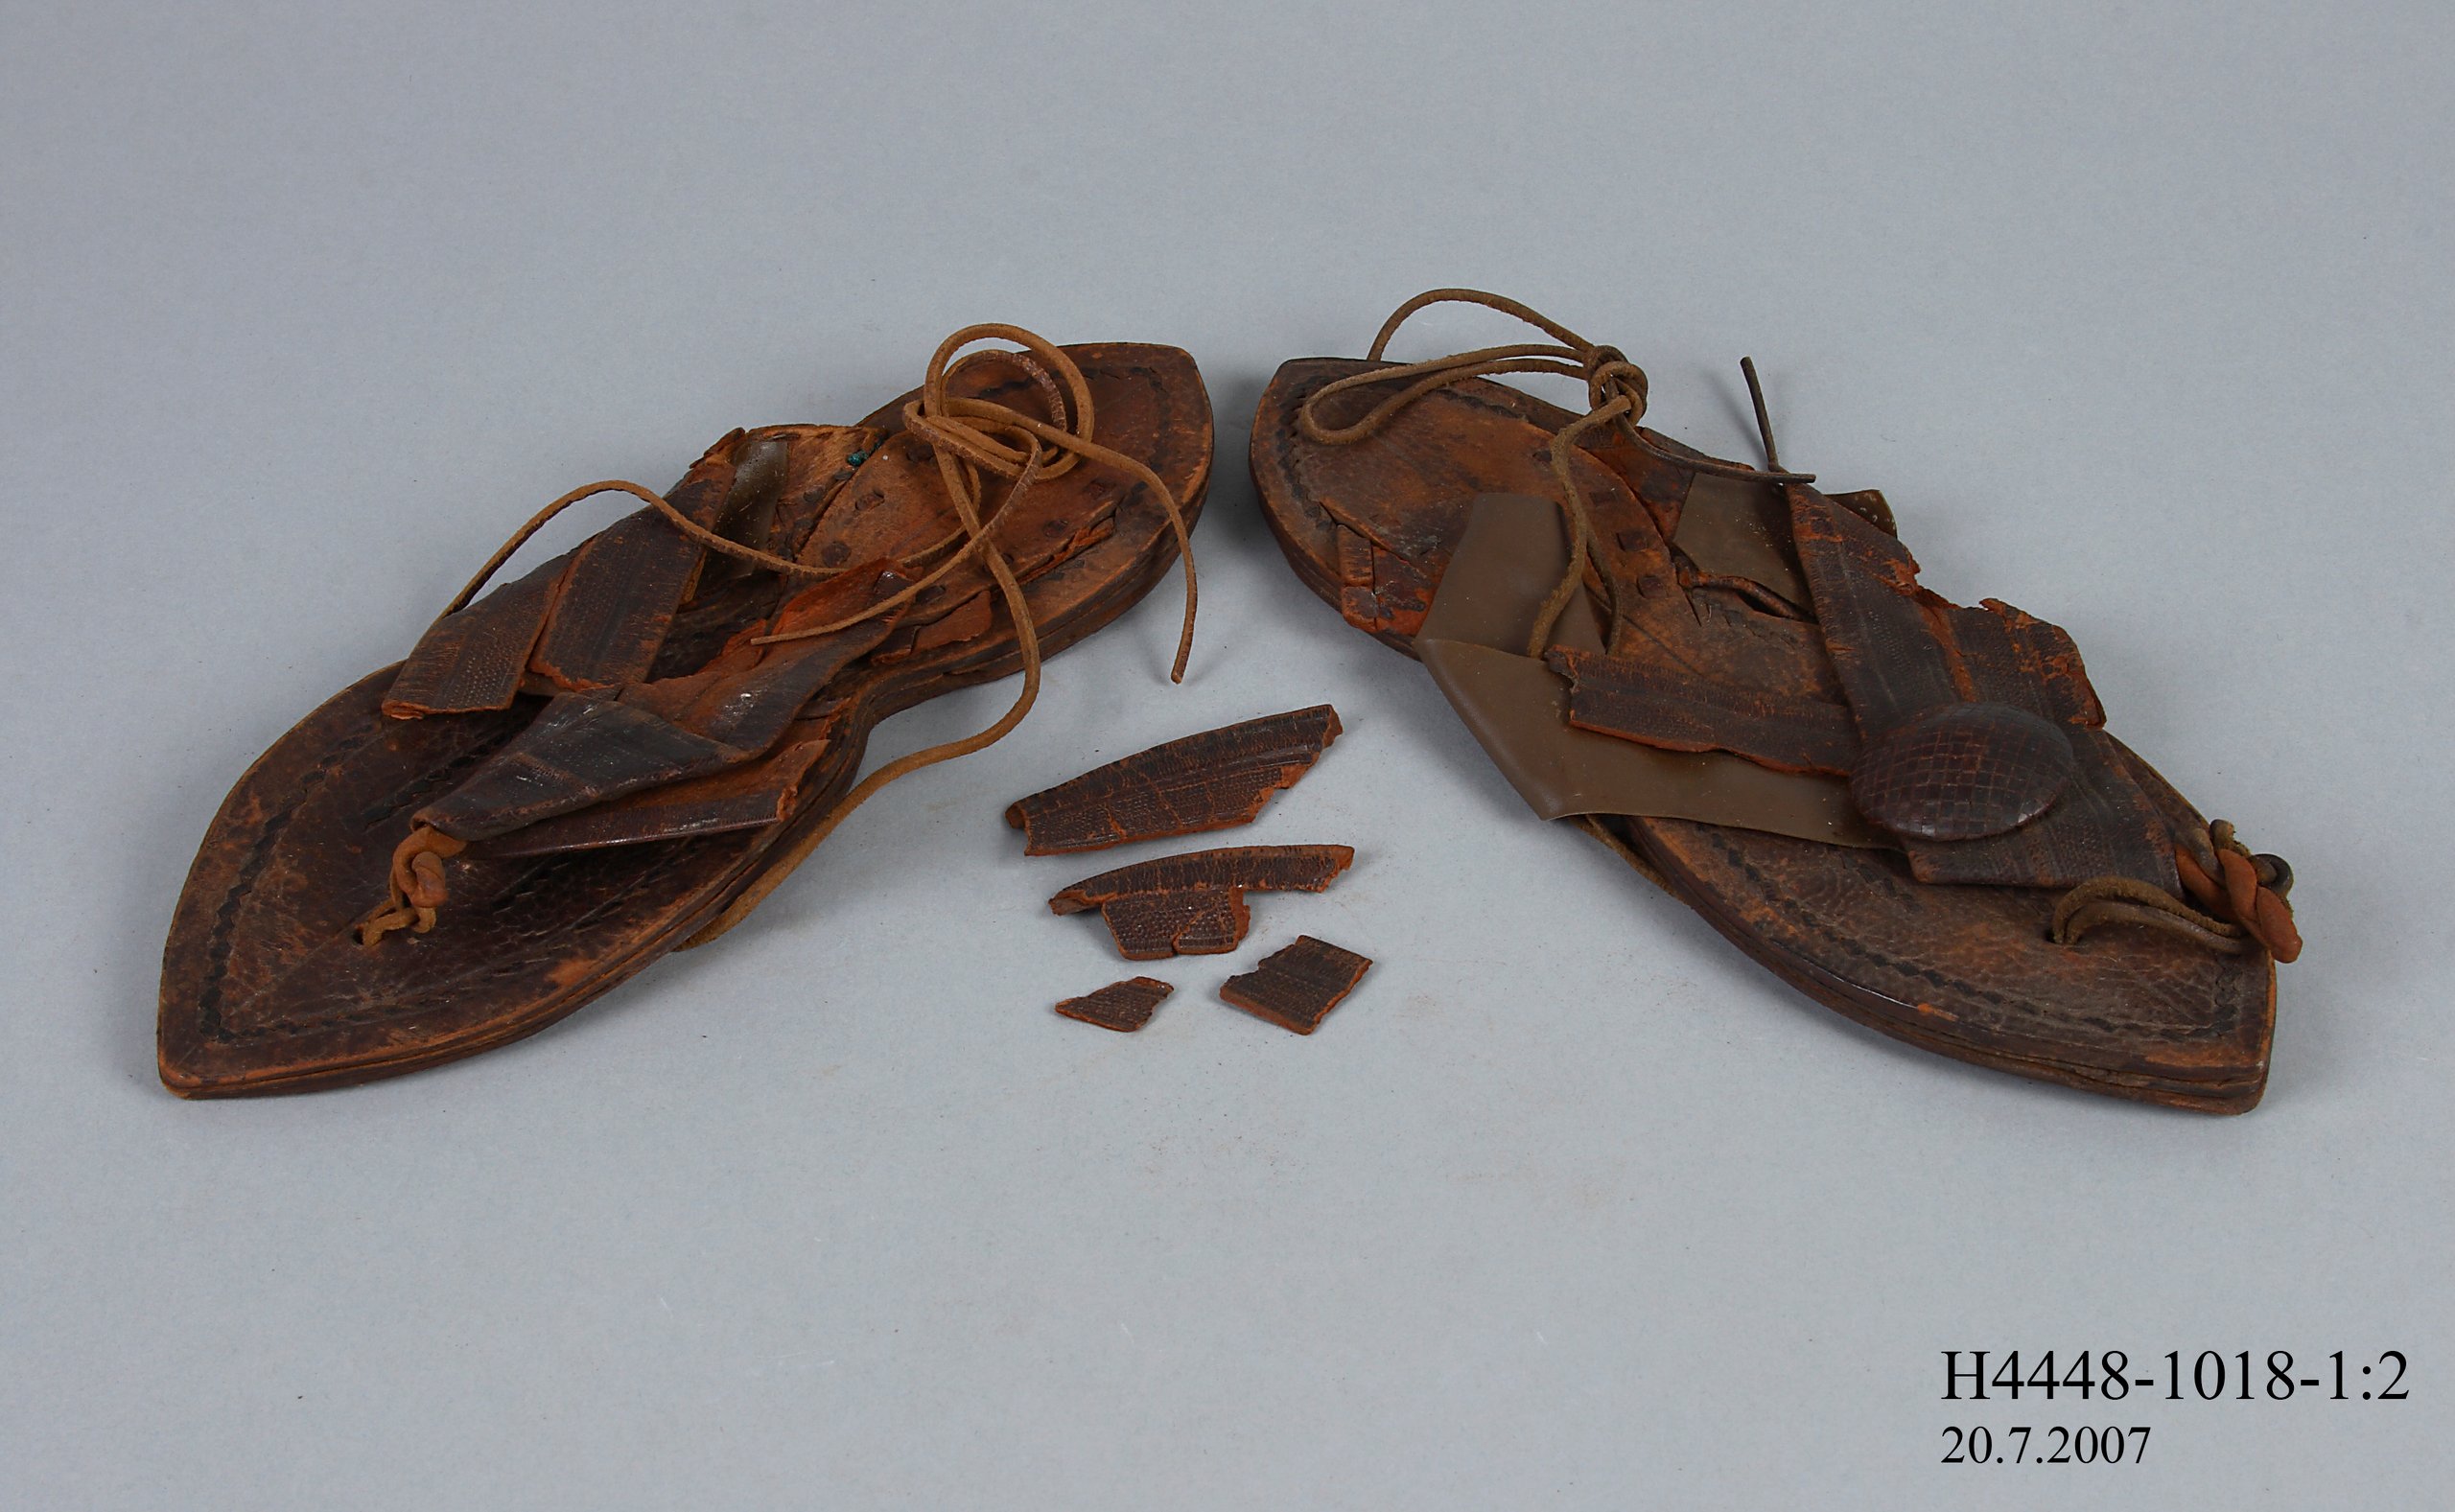 Pair of toe thong sandals by Hausa tribe